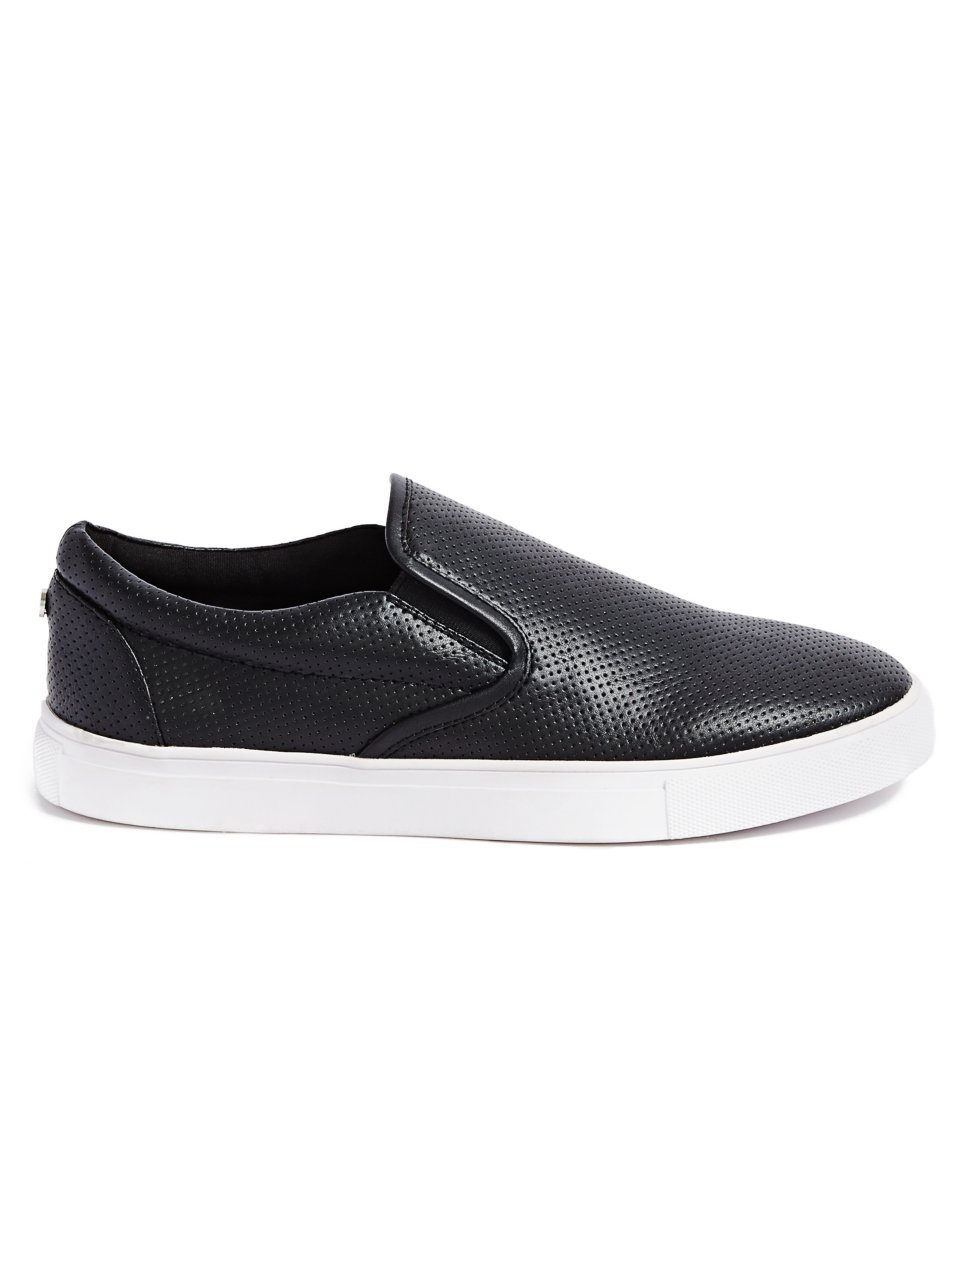 G By Guess Men's Chad Slip-On Sneakers | eBay